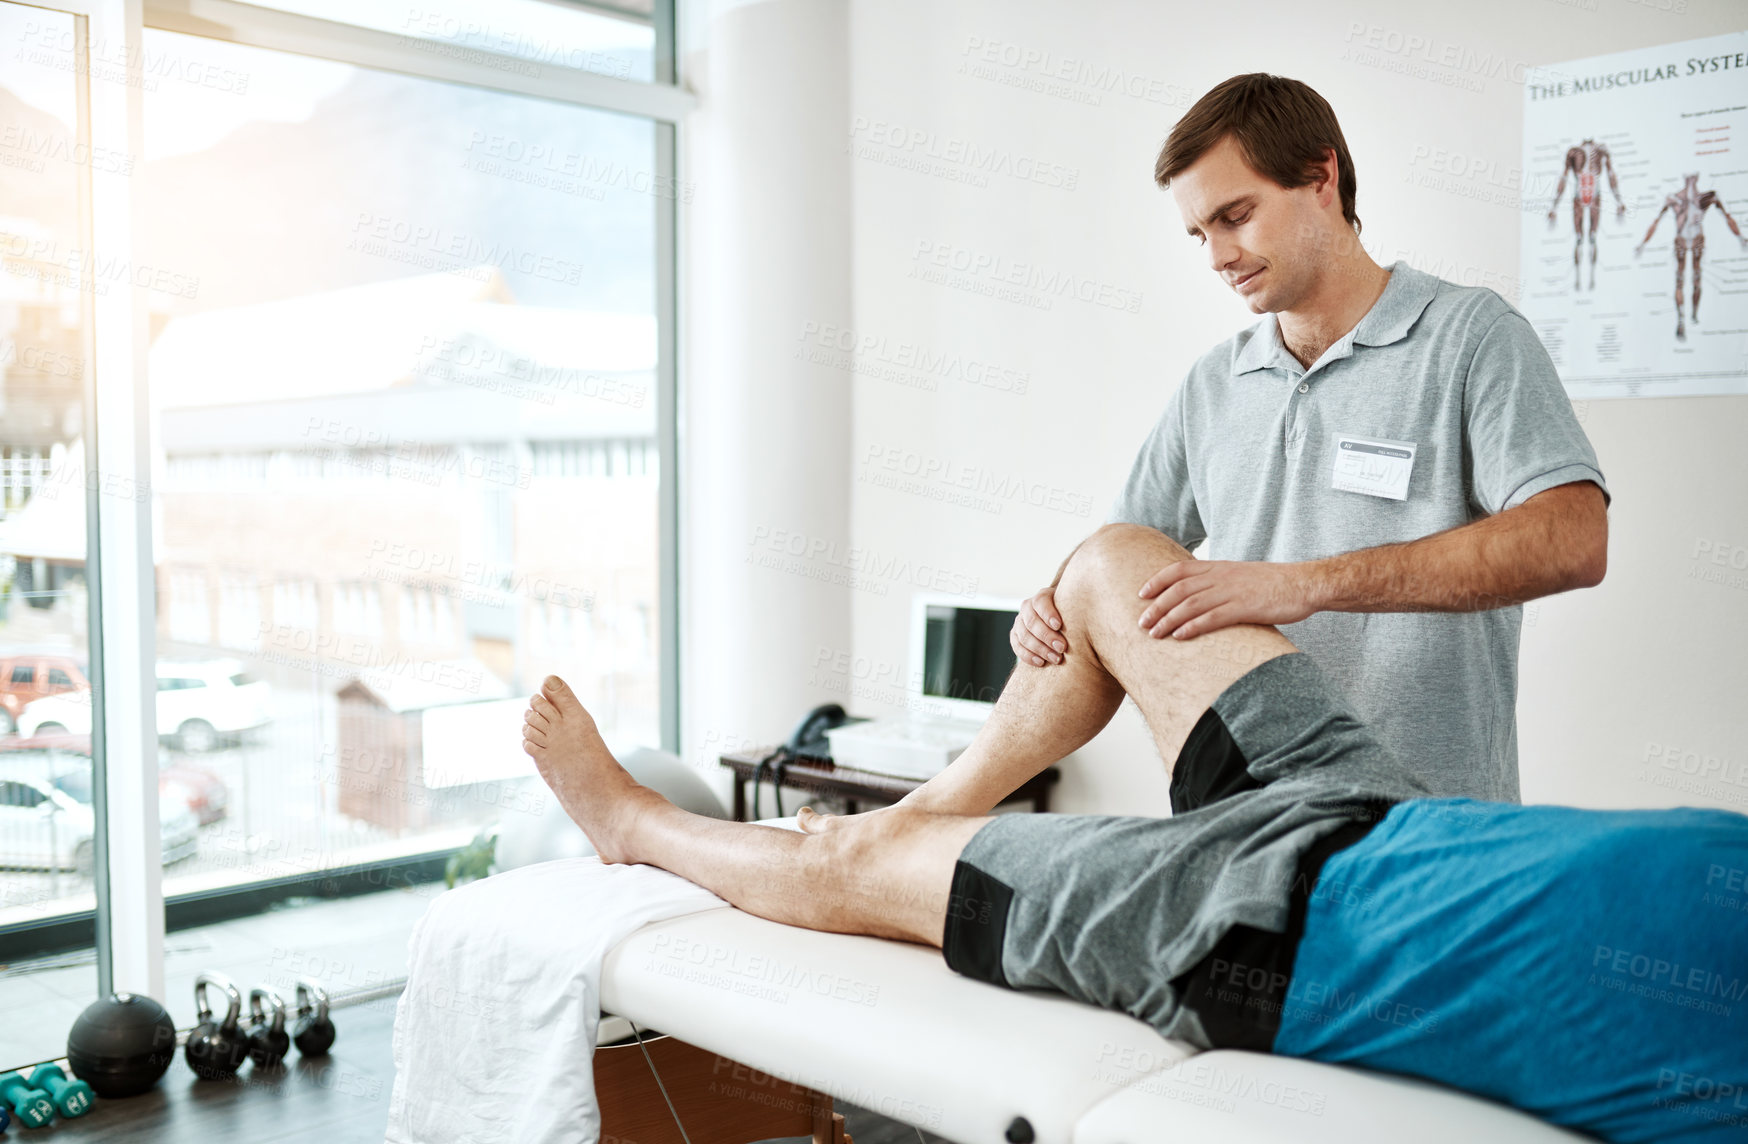 Buy stock photo Shot of a young male physiotherapist helping a client with leg exercises who's lying on a bed